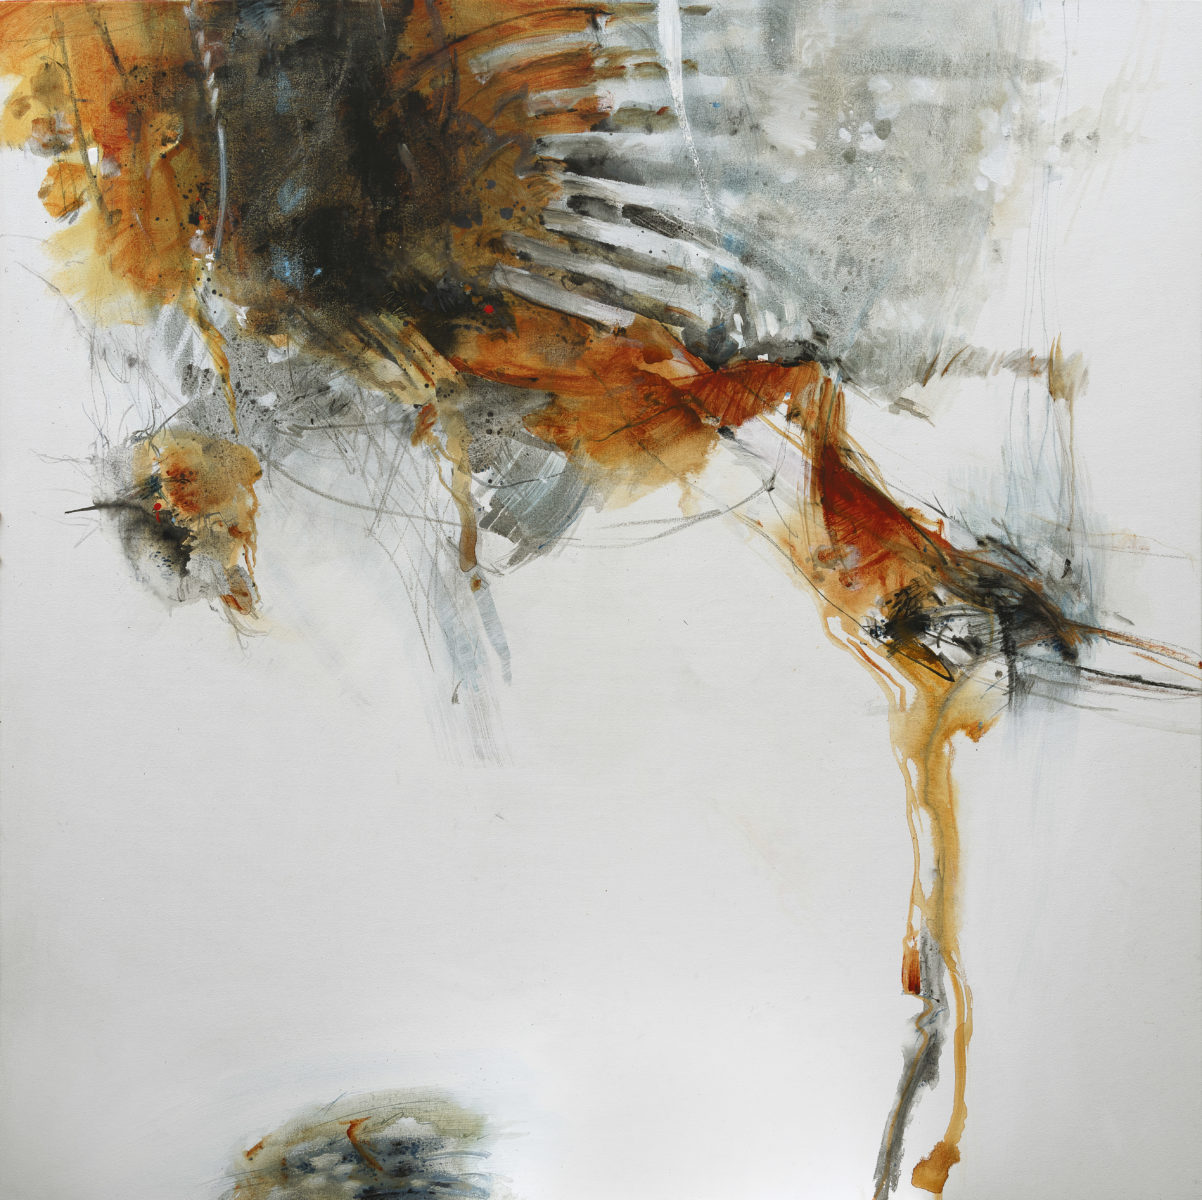 It Started With a Trickle I | Pam Walpole | Mixed media on canvas | 152 x 152 cm | $6800